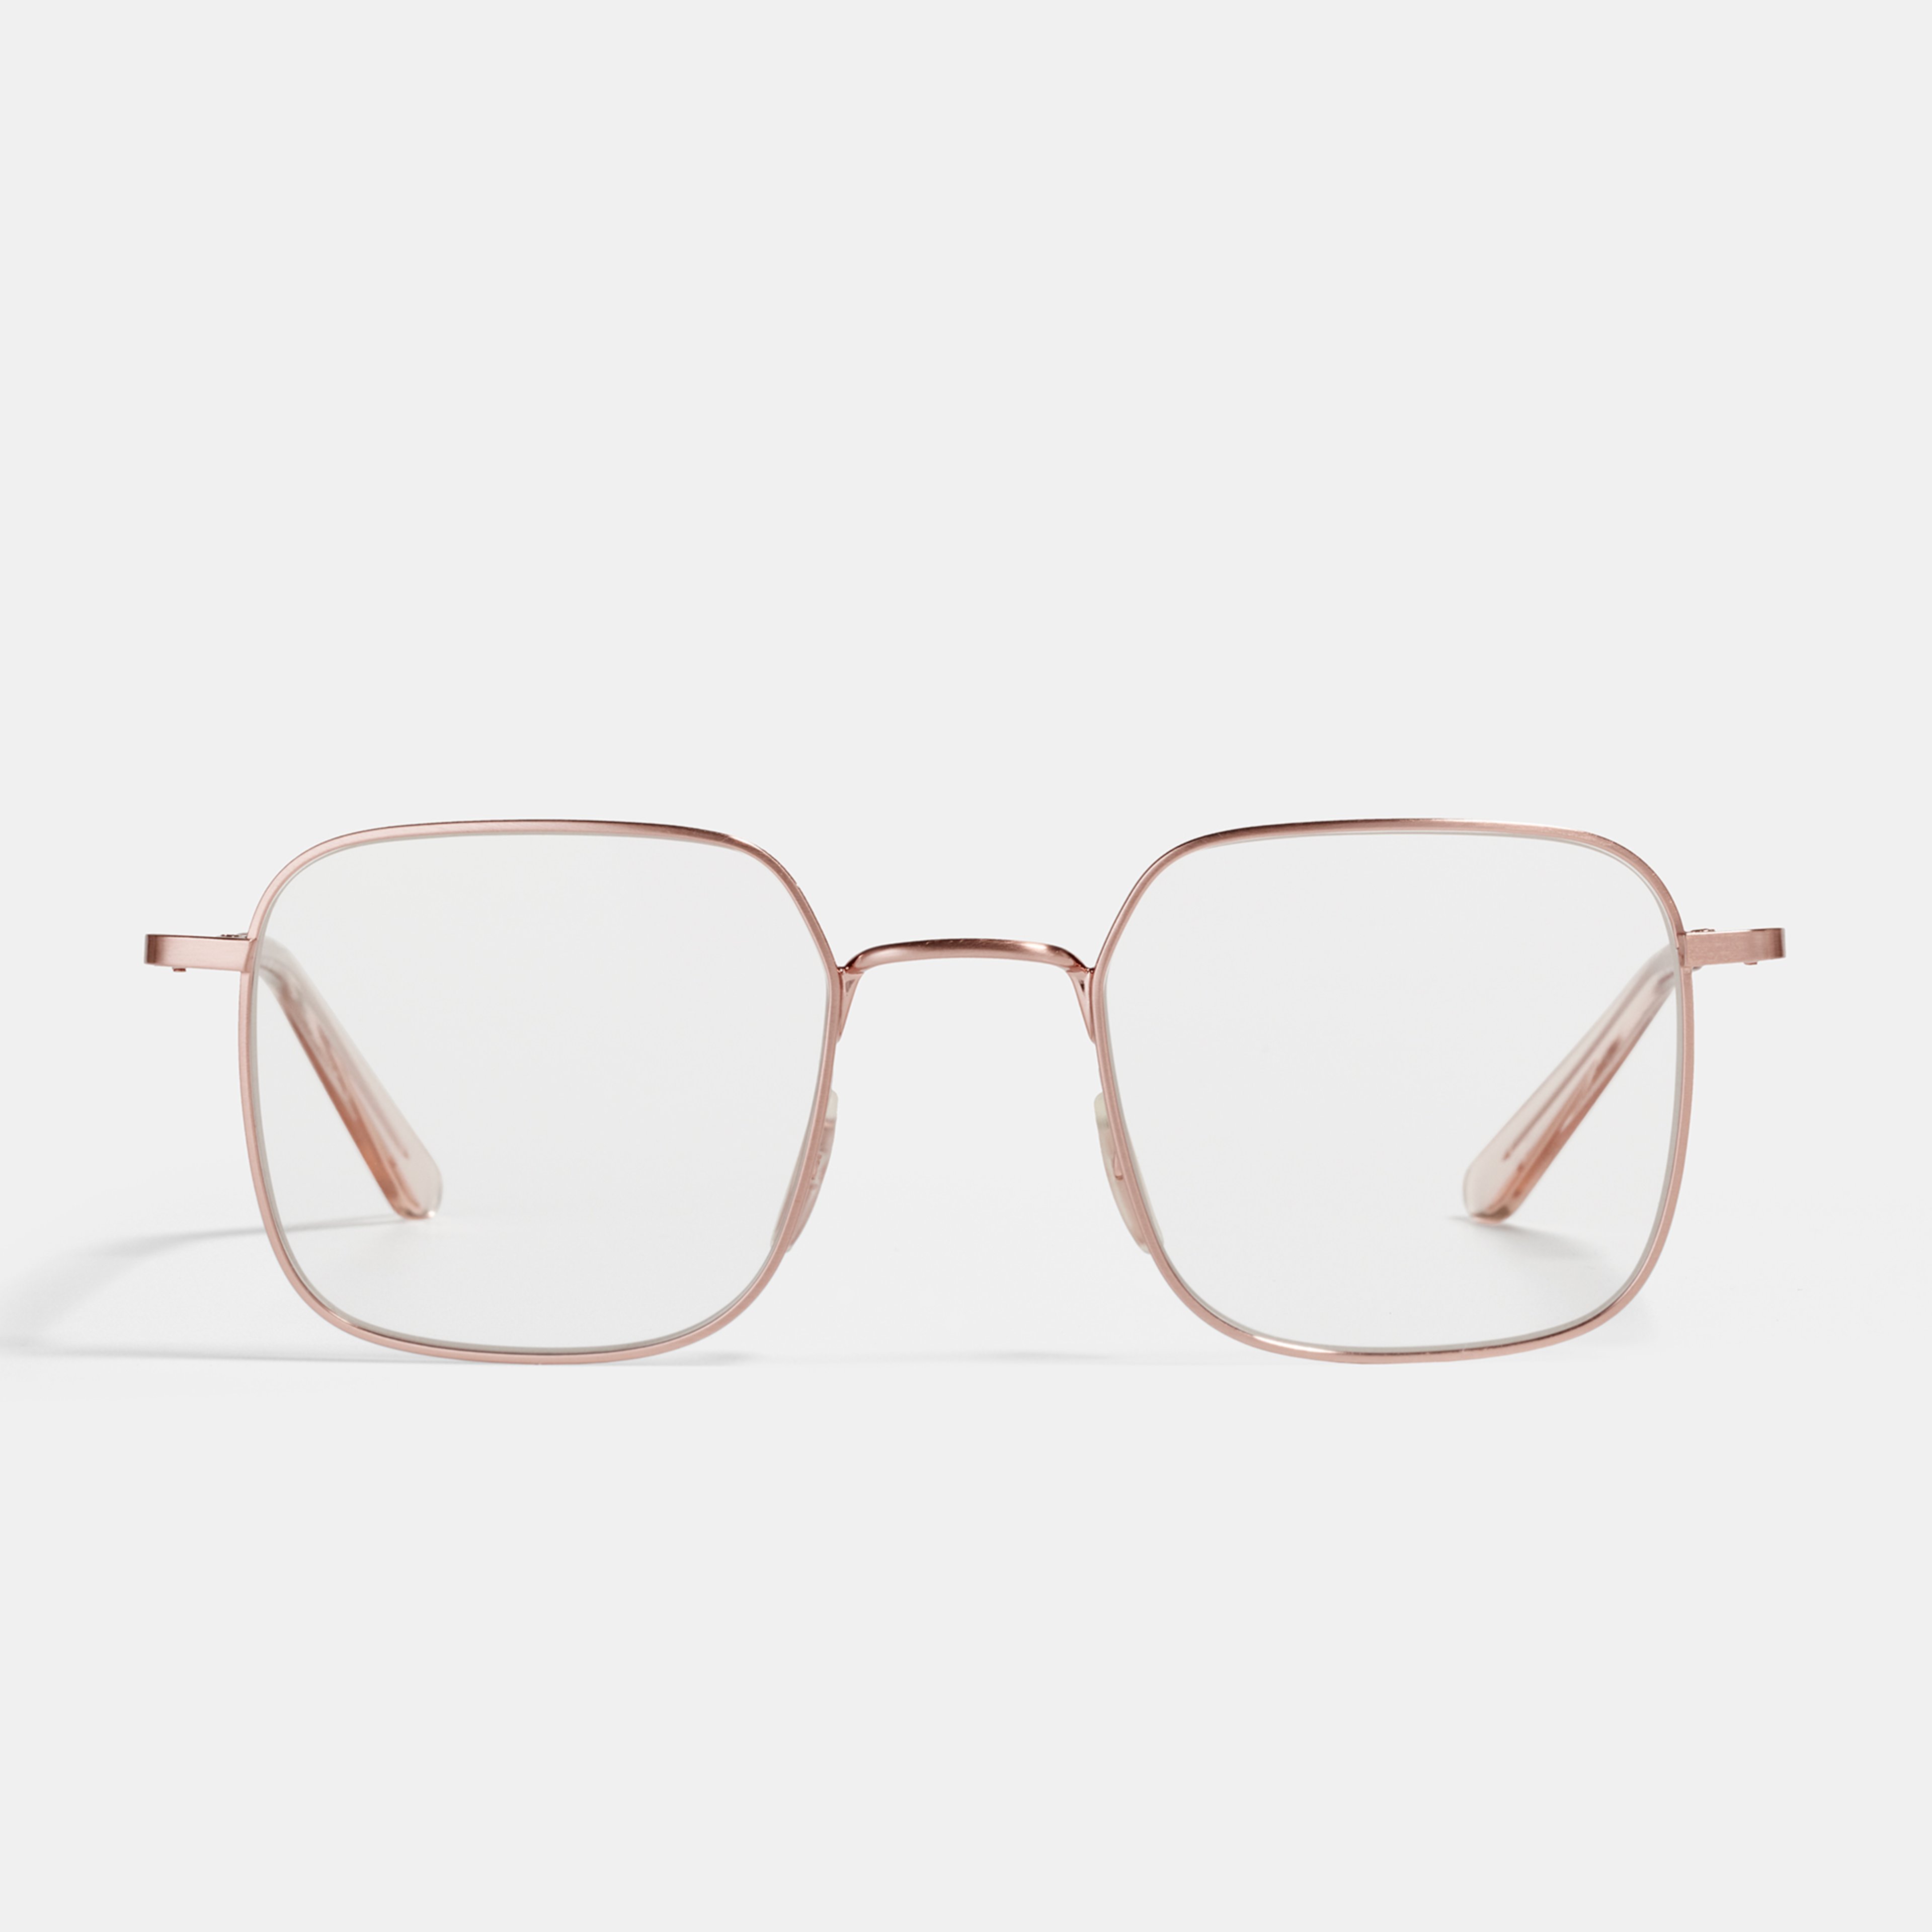 Ace & Tate Glasses |  Metal in Pink